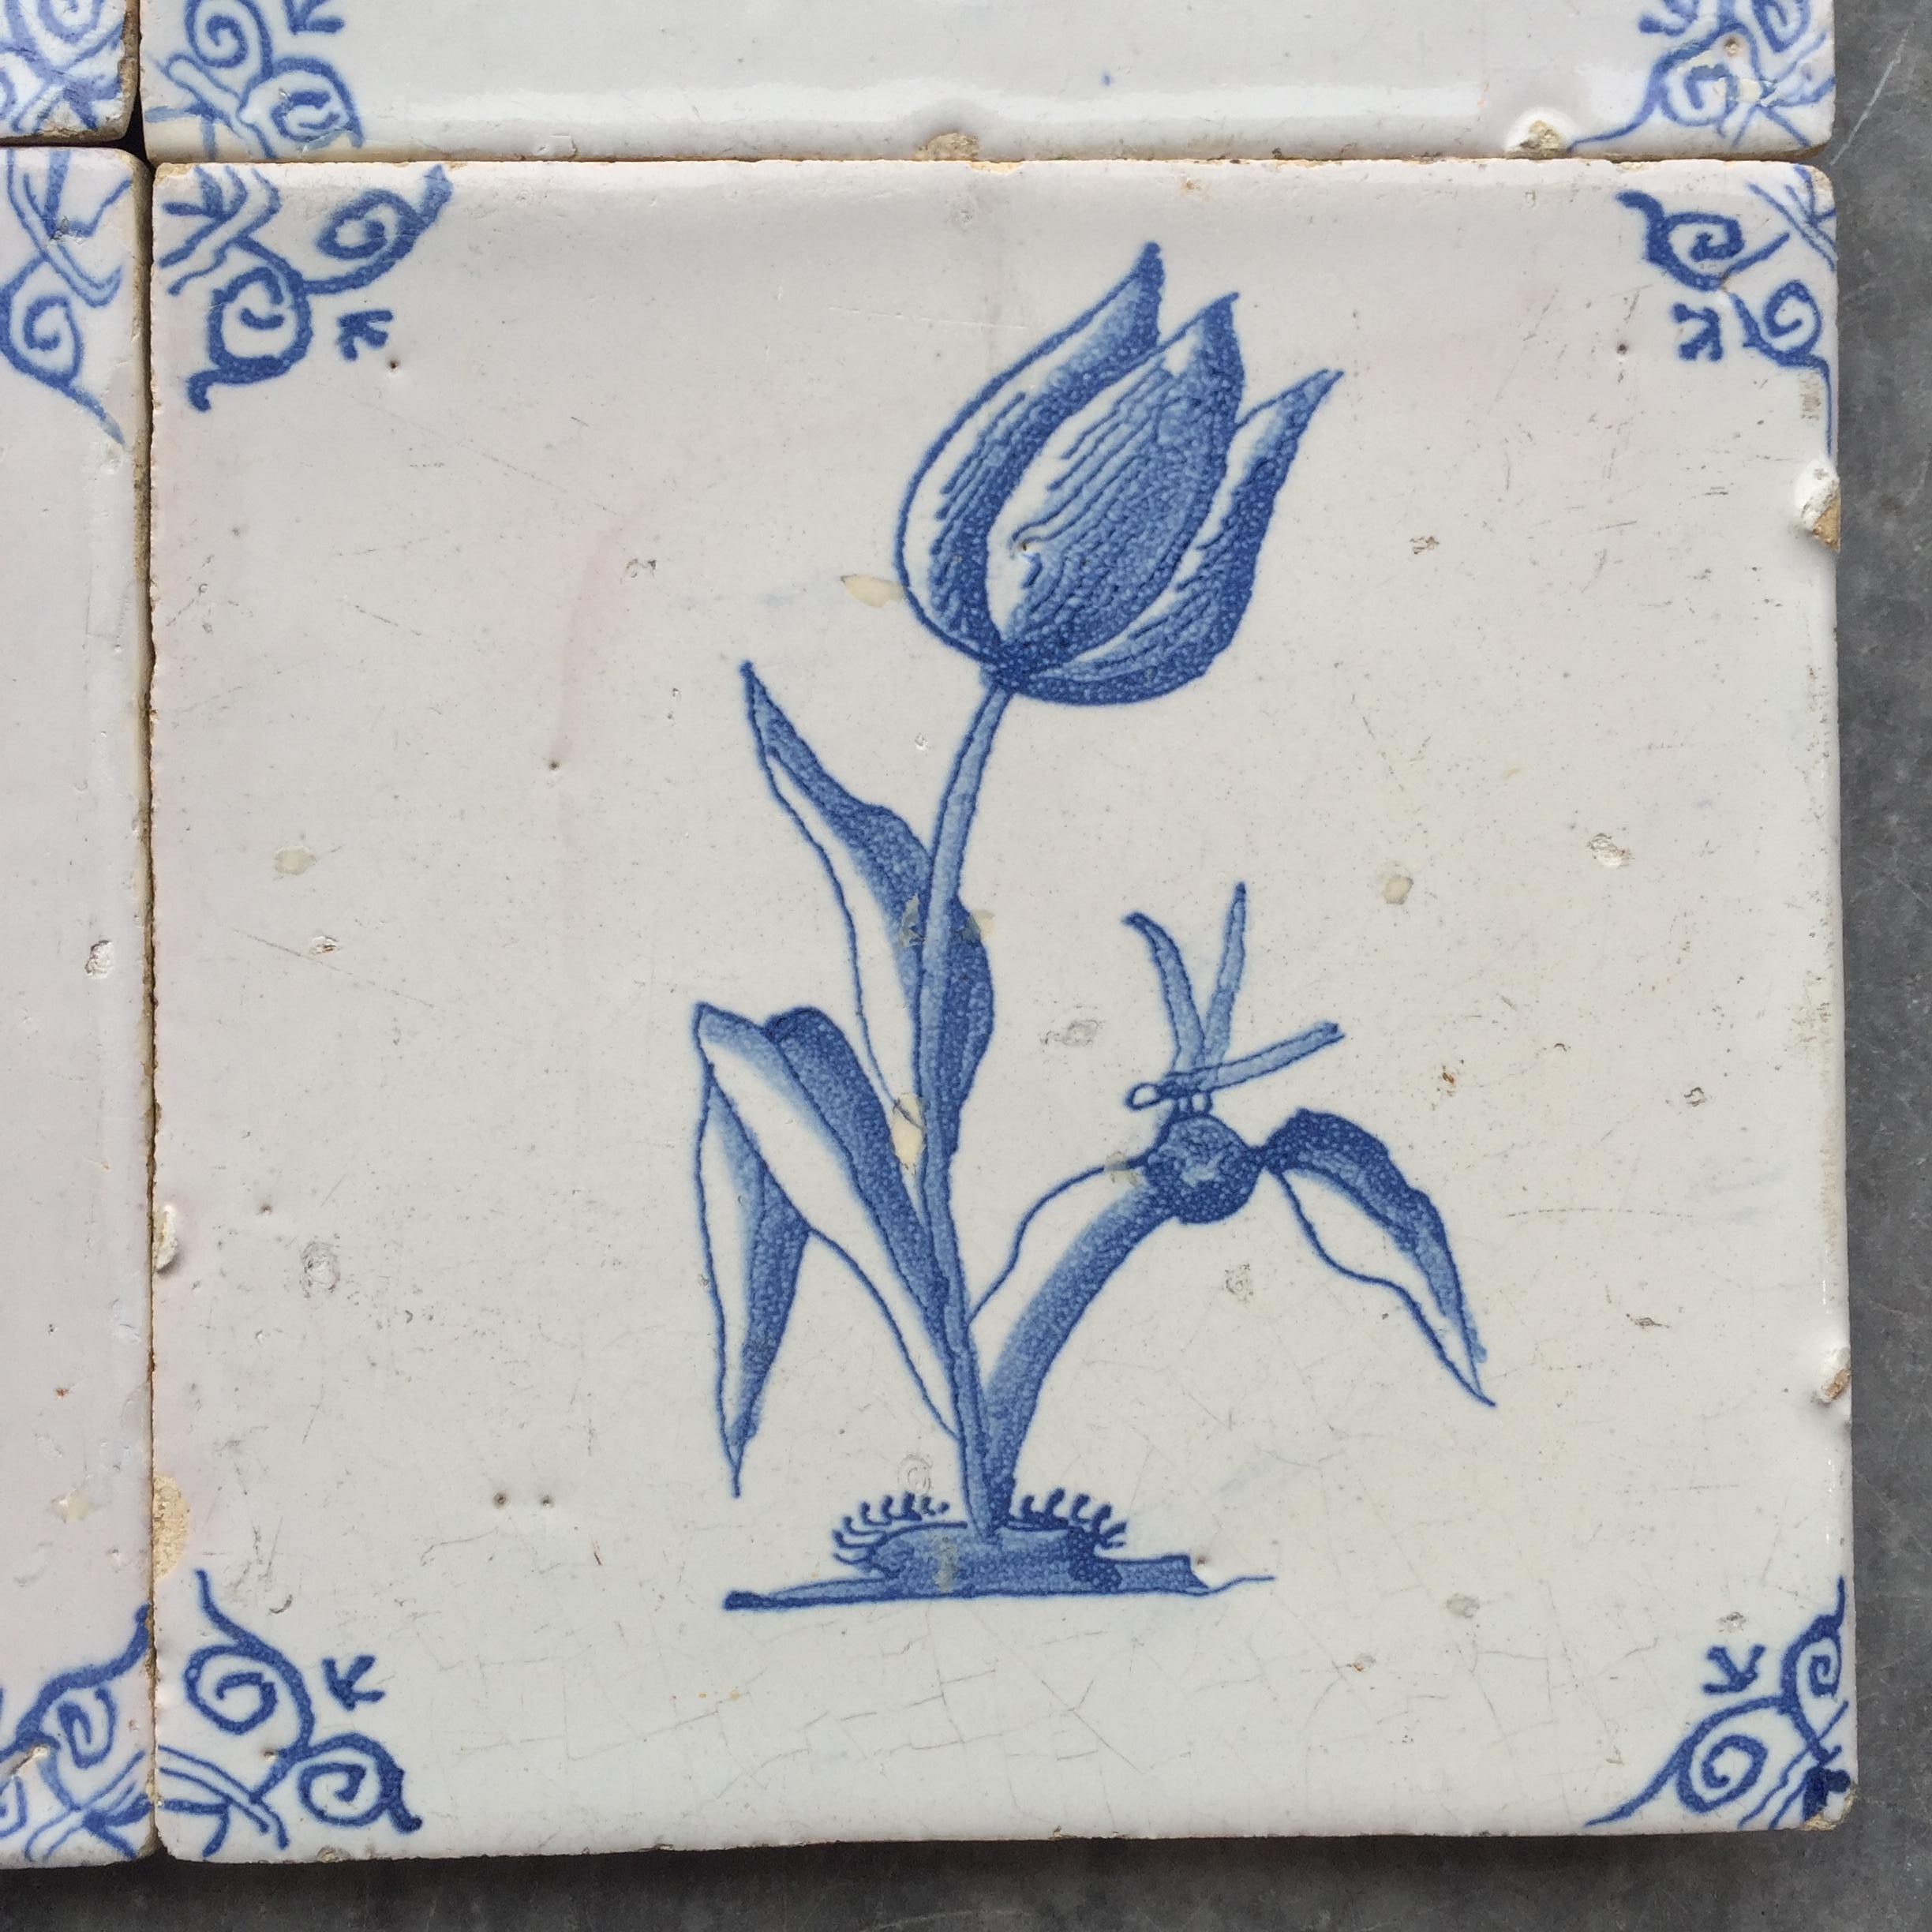 Rare Set of 12 Dutch Delft Tiles with Flowers and Insects, 17th Century 11